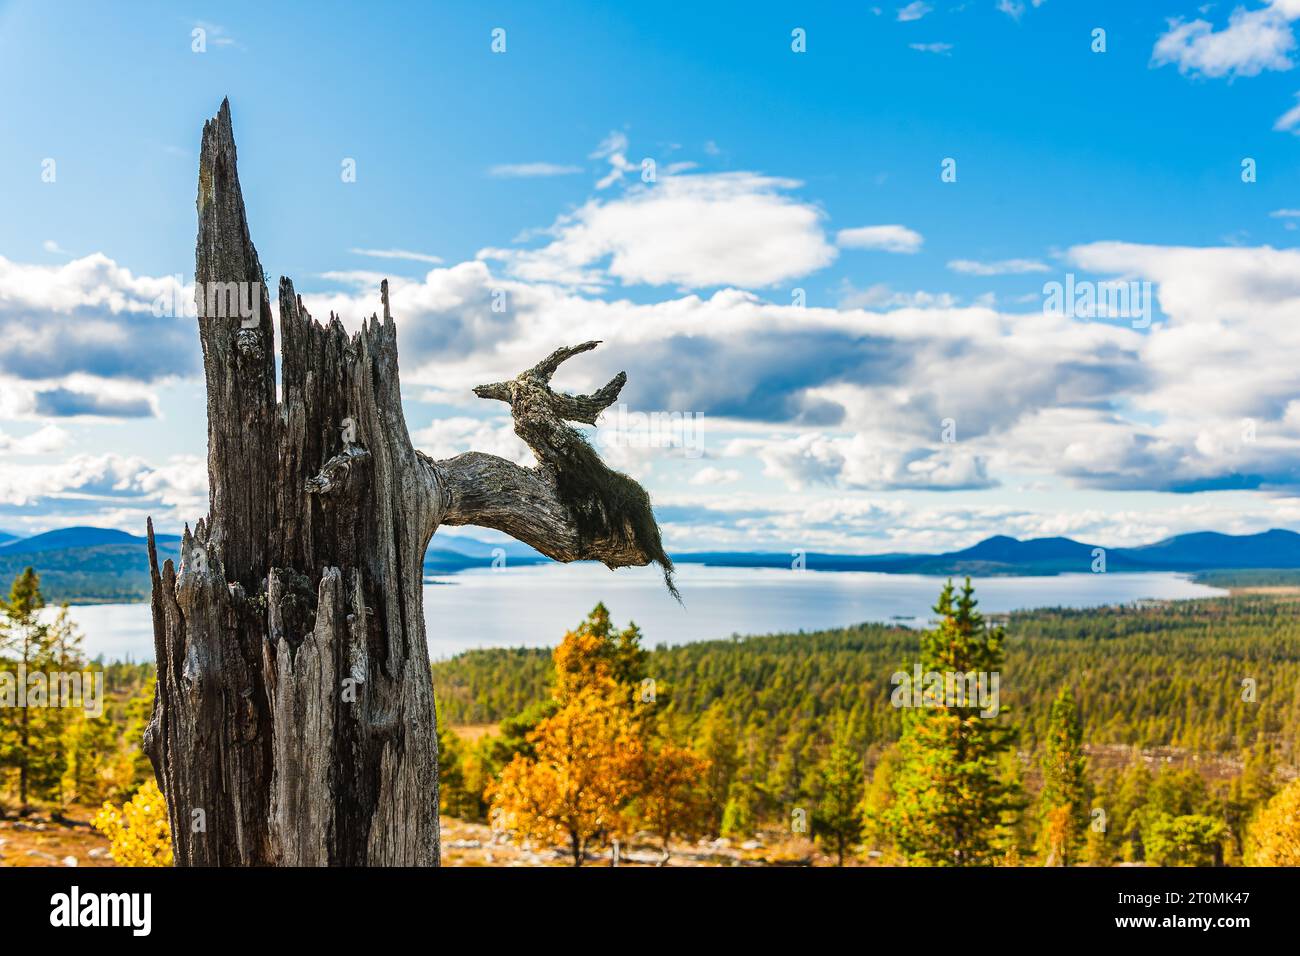 Breathtaking Swedish wilderness with mountains, old tree, and serene environment. Stock Photo